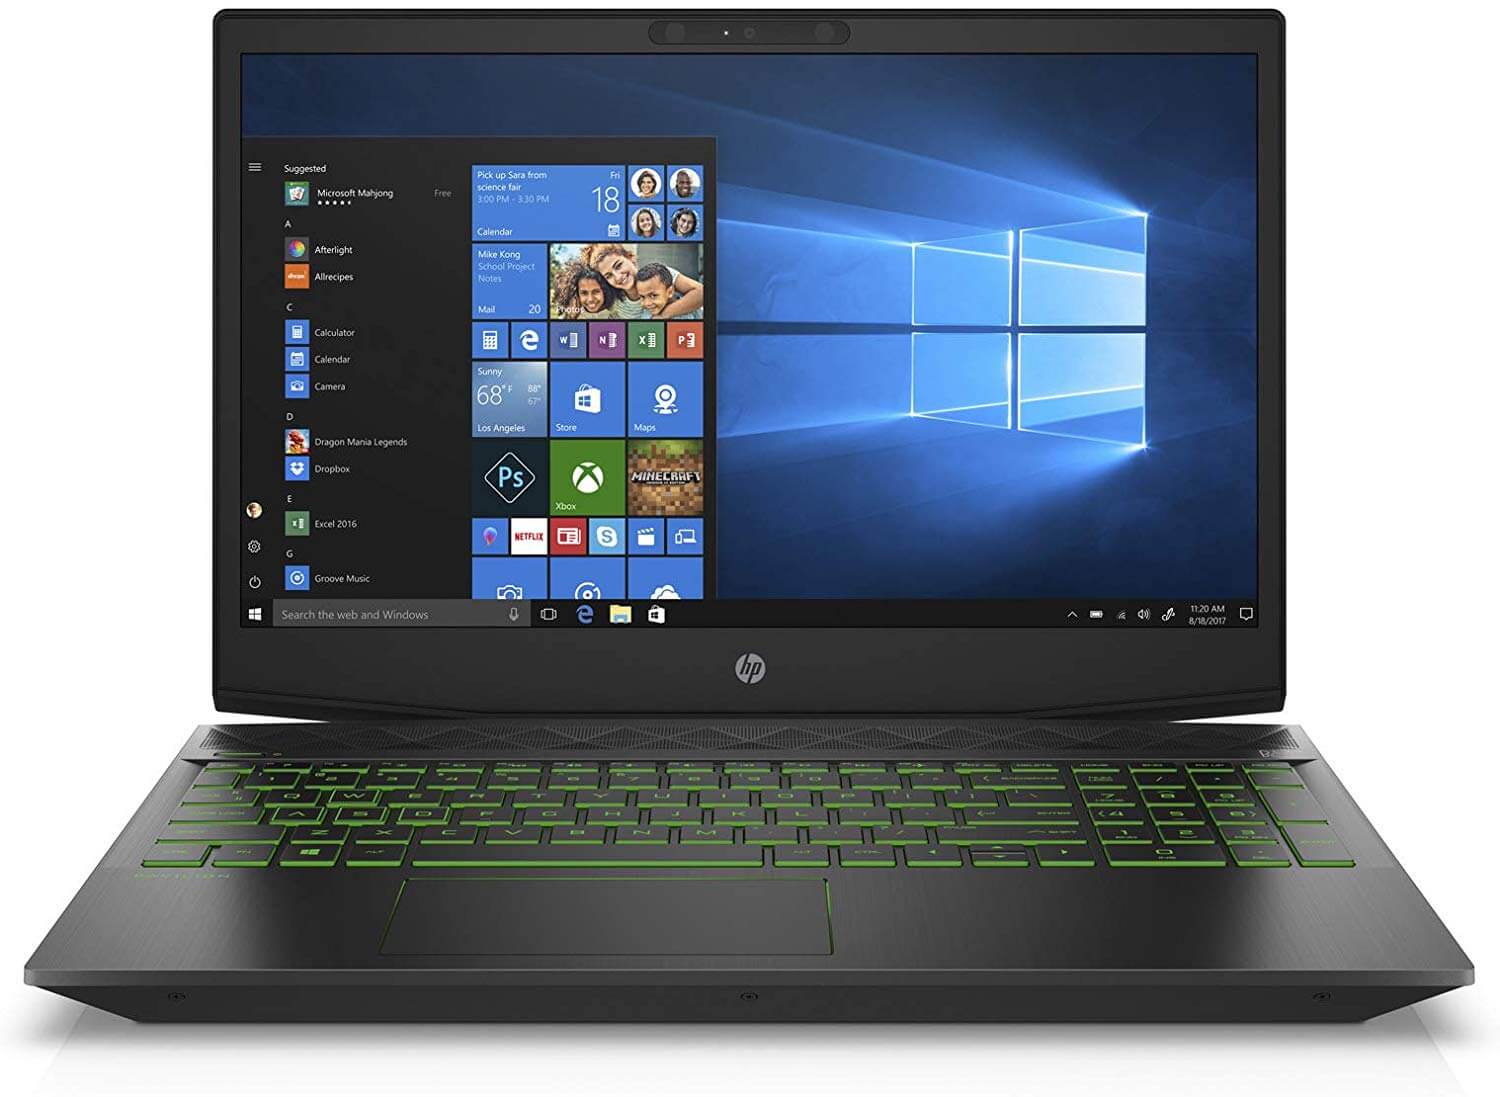 HP Pavilion 15-cx0019ne Notebook With 15.6-Inch Display, Core i5 Processor/16GB/1TB HDD/NVIDIA GeForce GTX 1050 Graphic Card With English/Arabic Keyboard Shadow Black